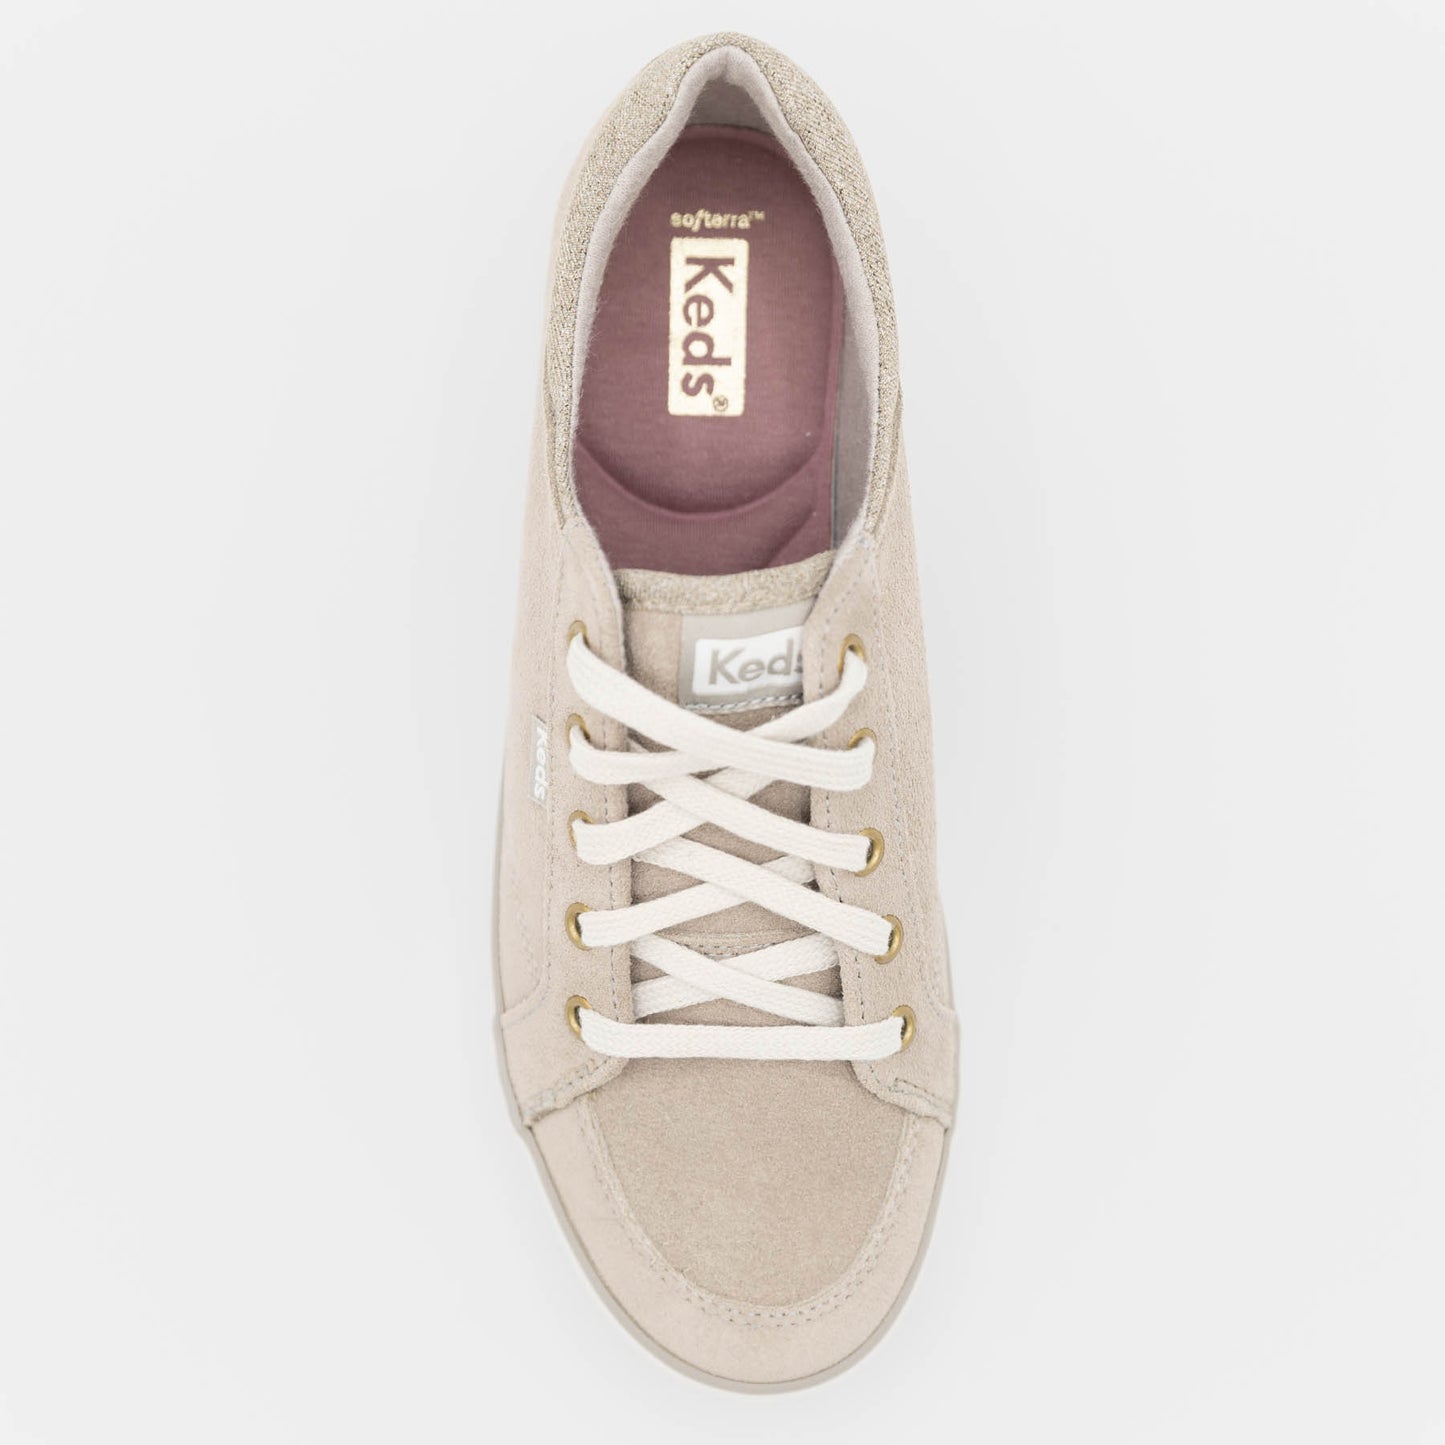 Keds - Center Ii Dove Gray Suede Lace Up Sneaker